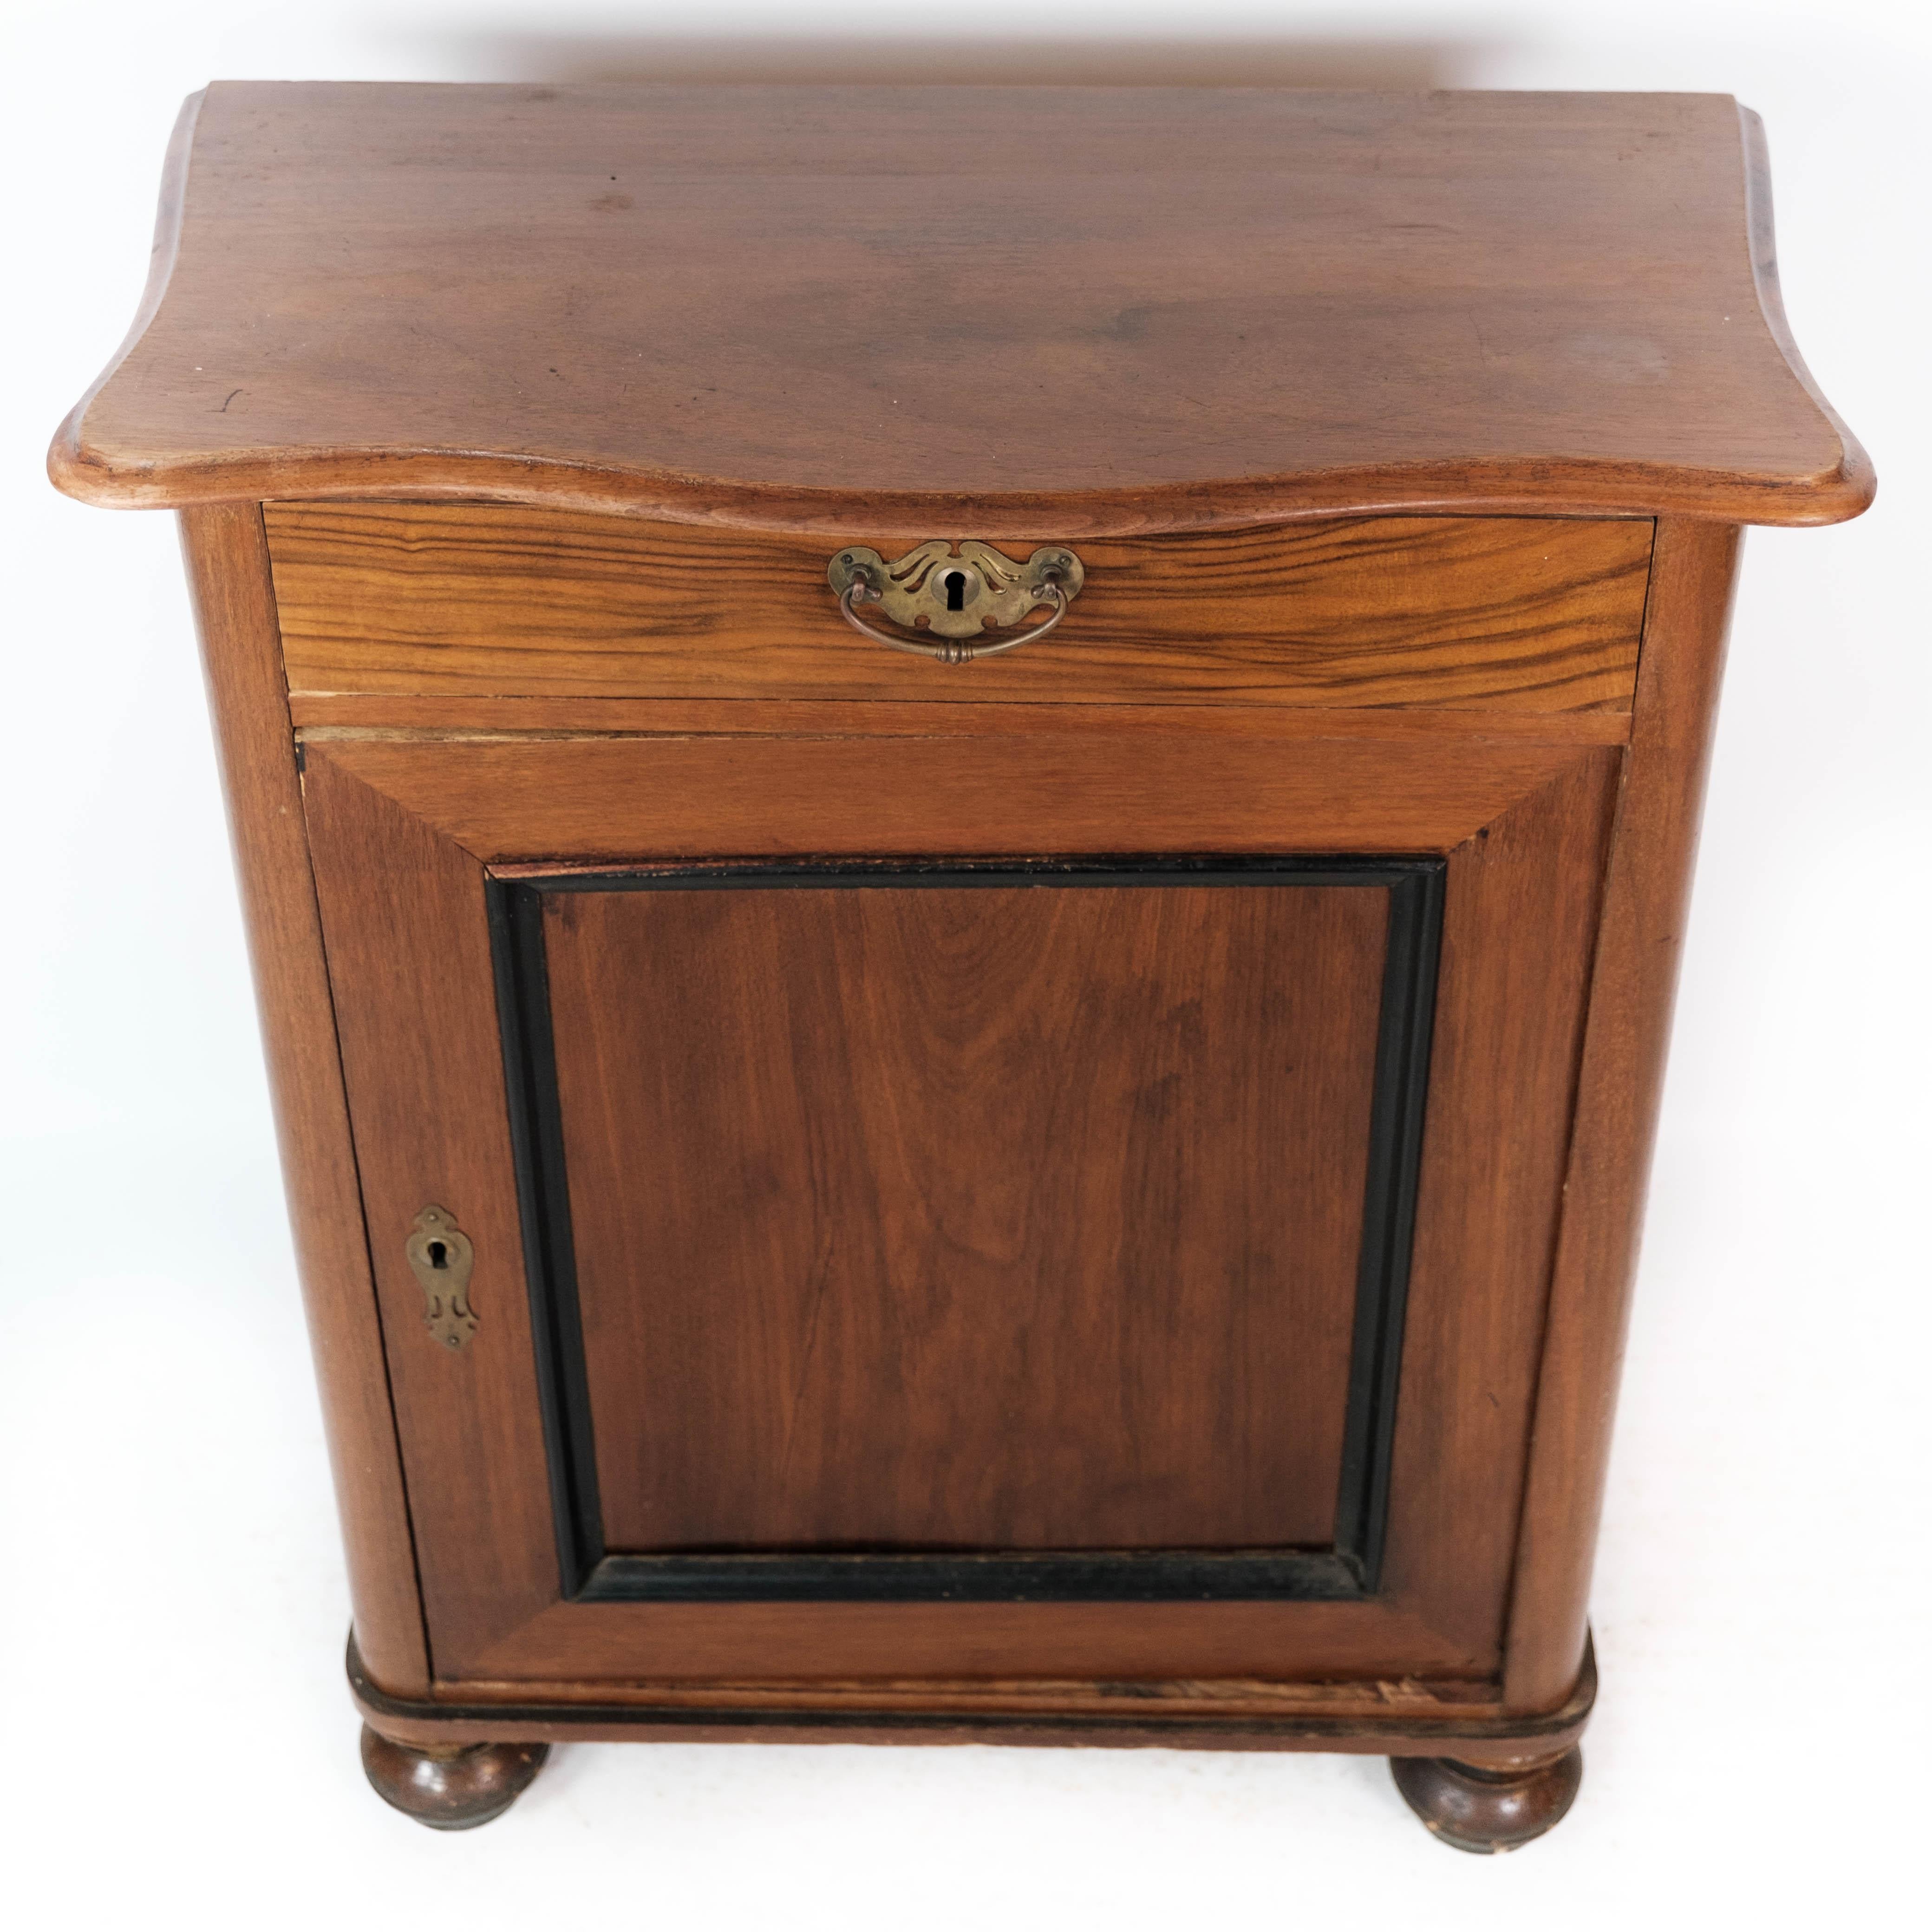 The entryway cabinet, crafted from rich mahogany, stands as a testament to the elegance and craftsmanship of the late 19th century. Dating back to around 1880, this exquisite piece is in superb antique condition, showcasing its enduring beauty and